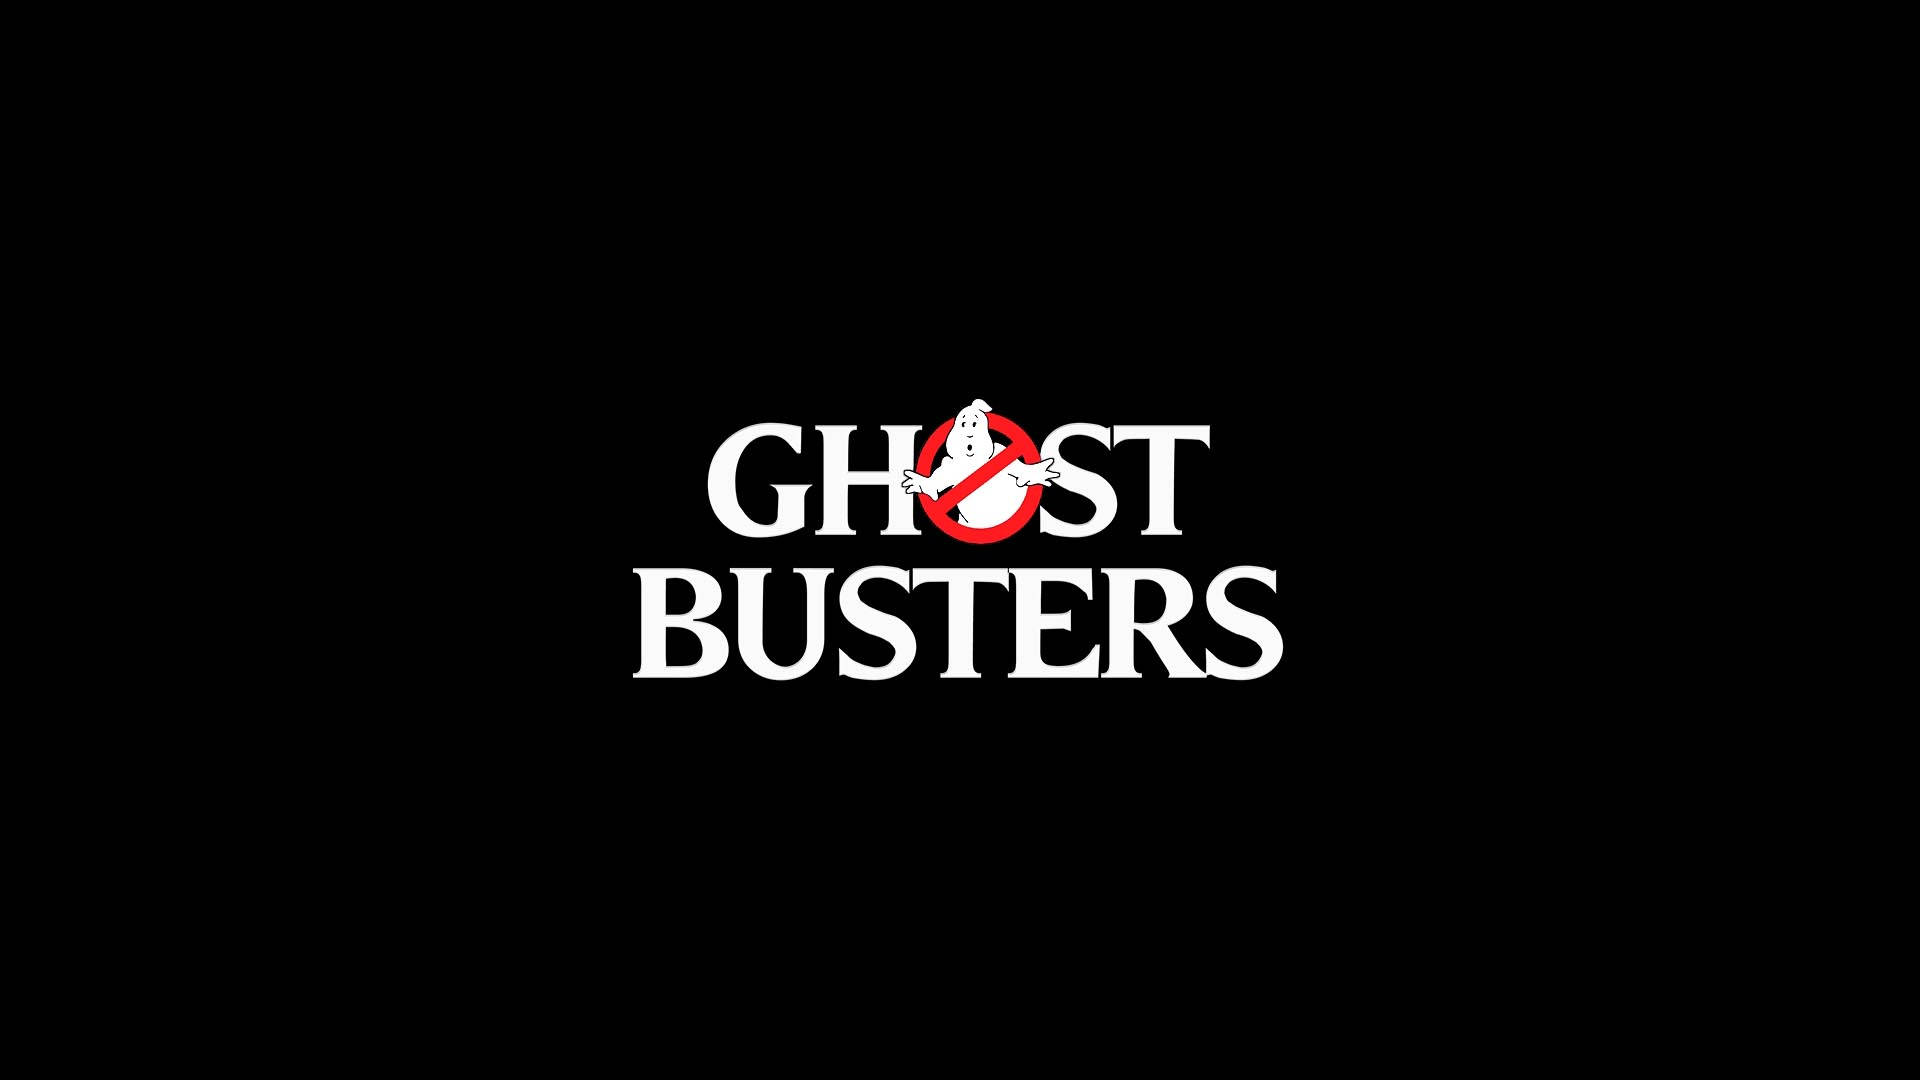 Ghostbusters Text